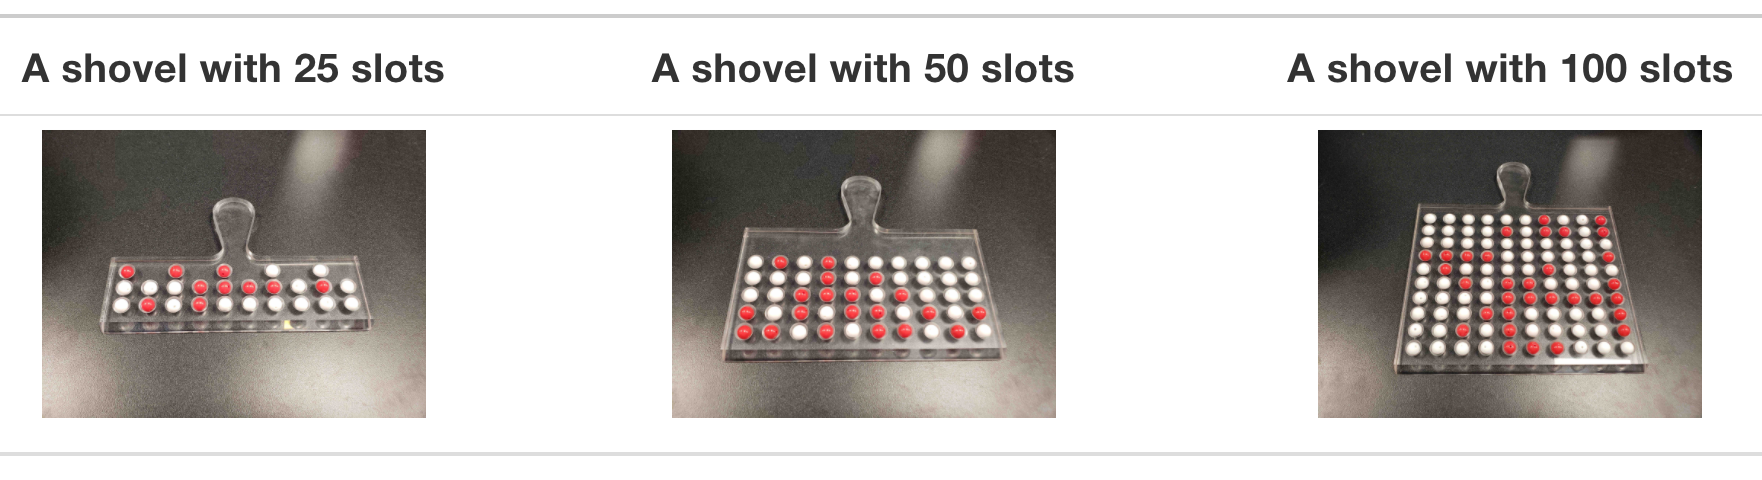 Three shovels to extract three different sample sizes.